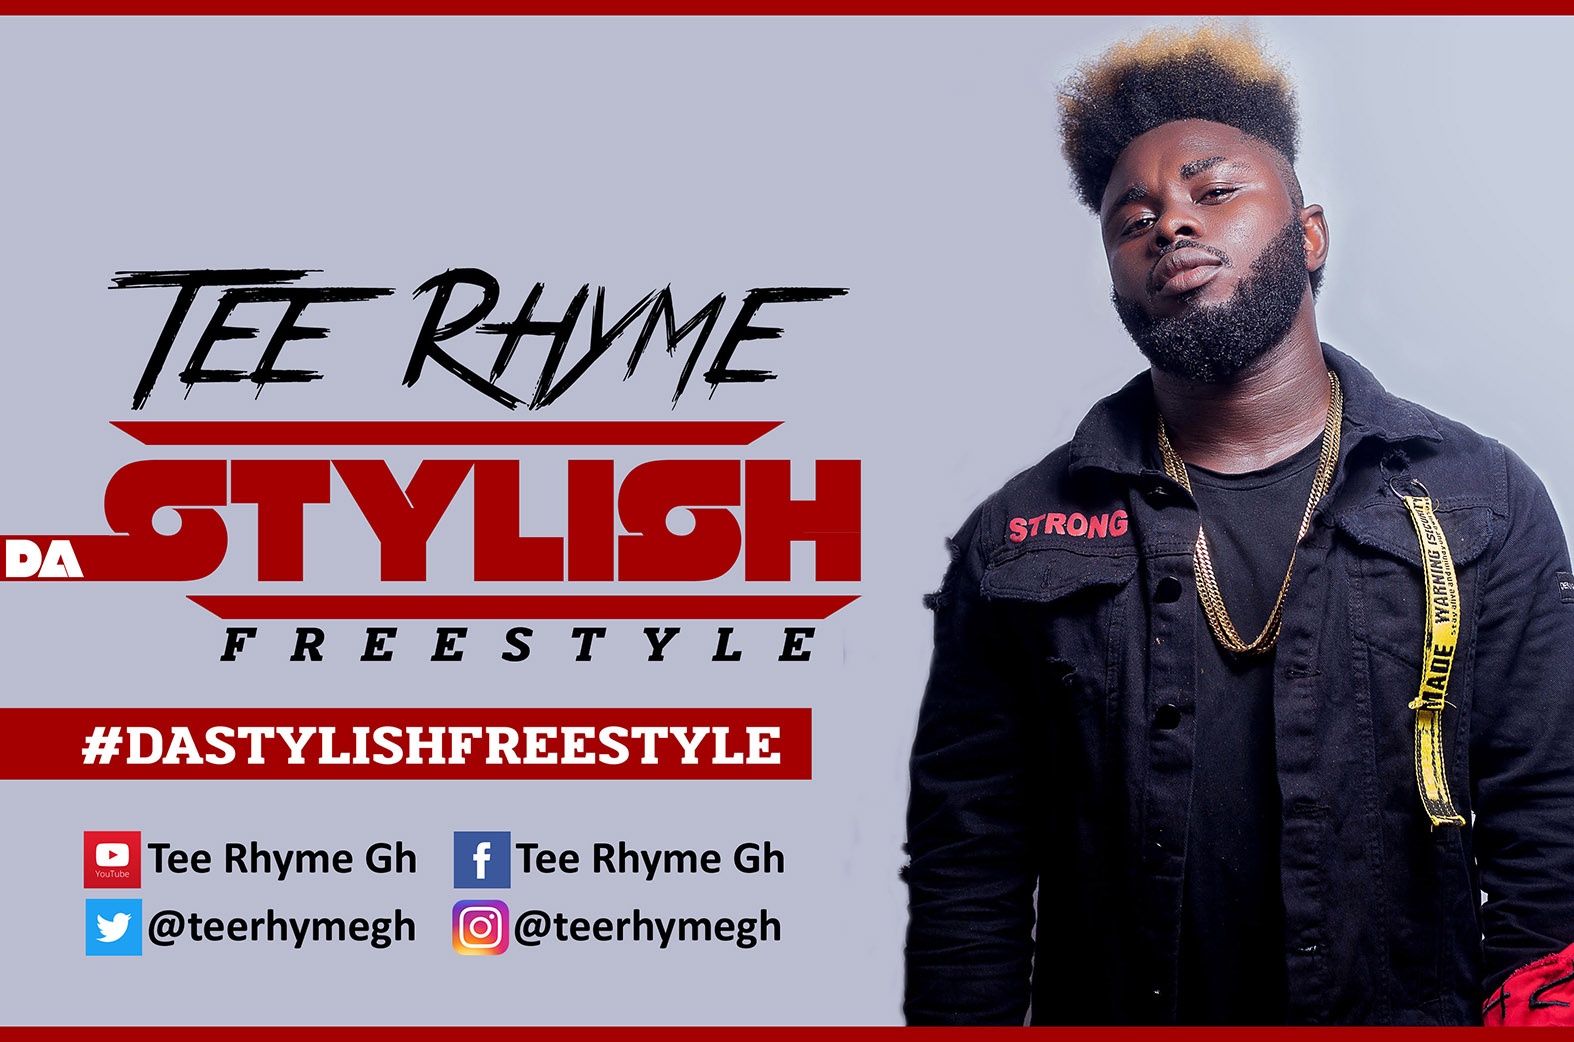 Tee Rhyme to come out with Da Stylish freestyle videos this year